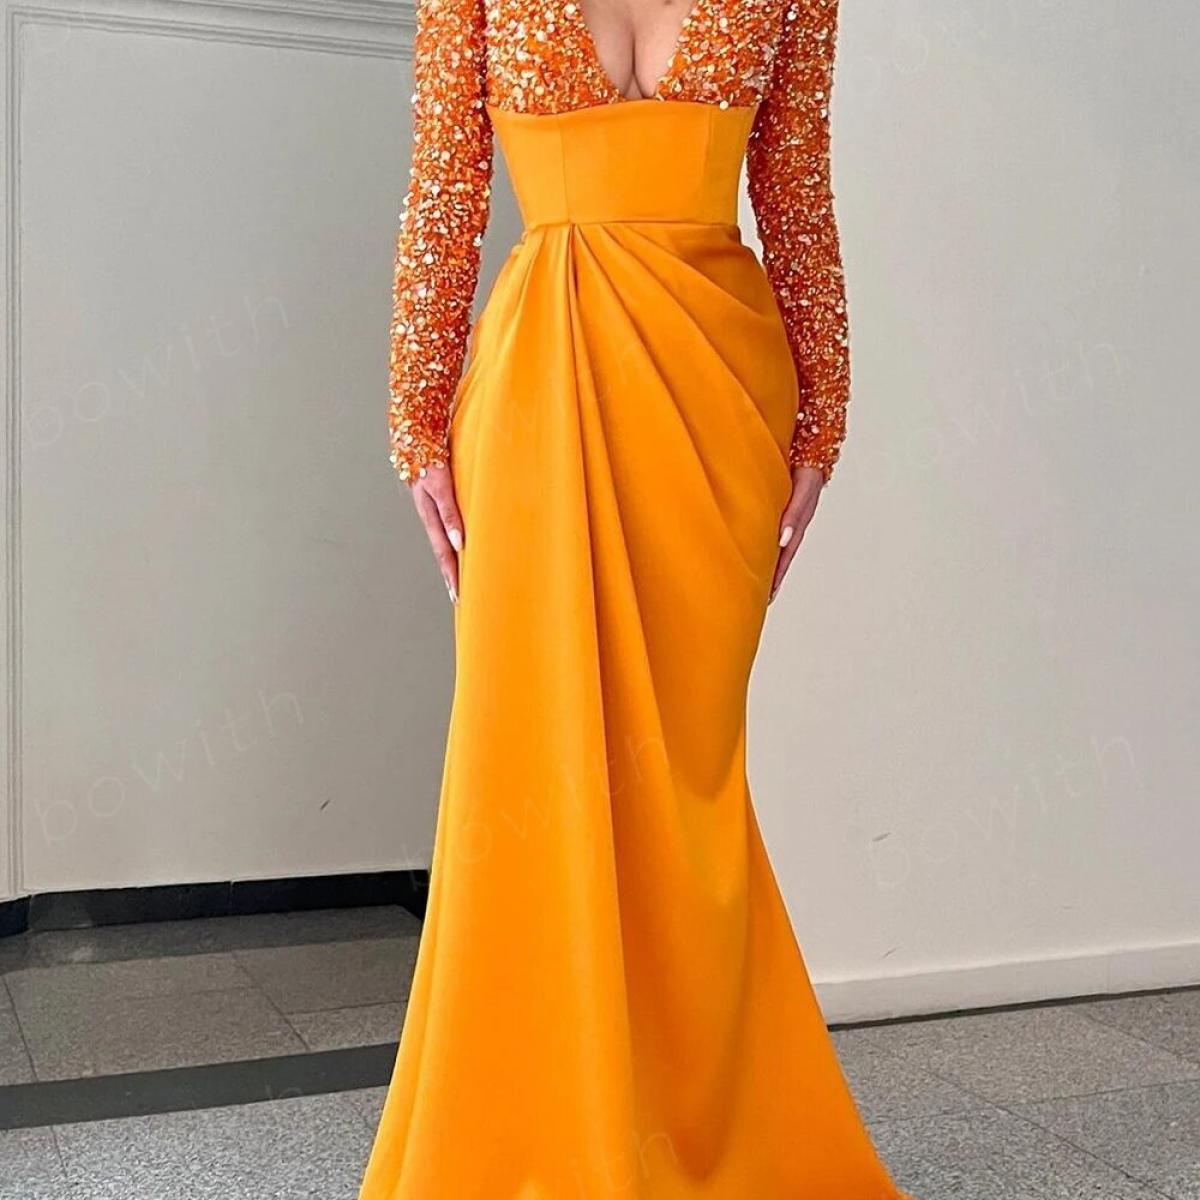 Bowith Sequin Evening Dresses Long Sleeves Luxury 2023 Shiny Elegant Woman Dress For Party Formal Occasion Dresses Vesti